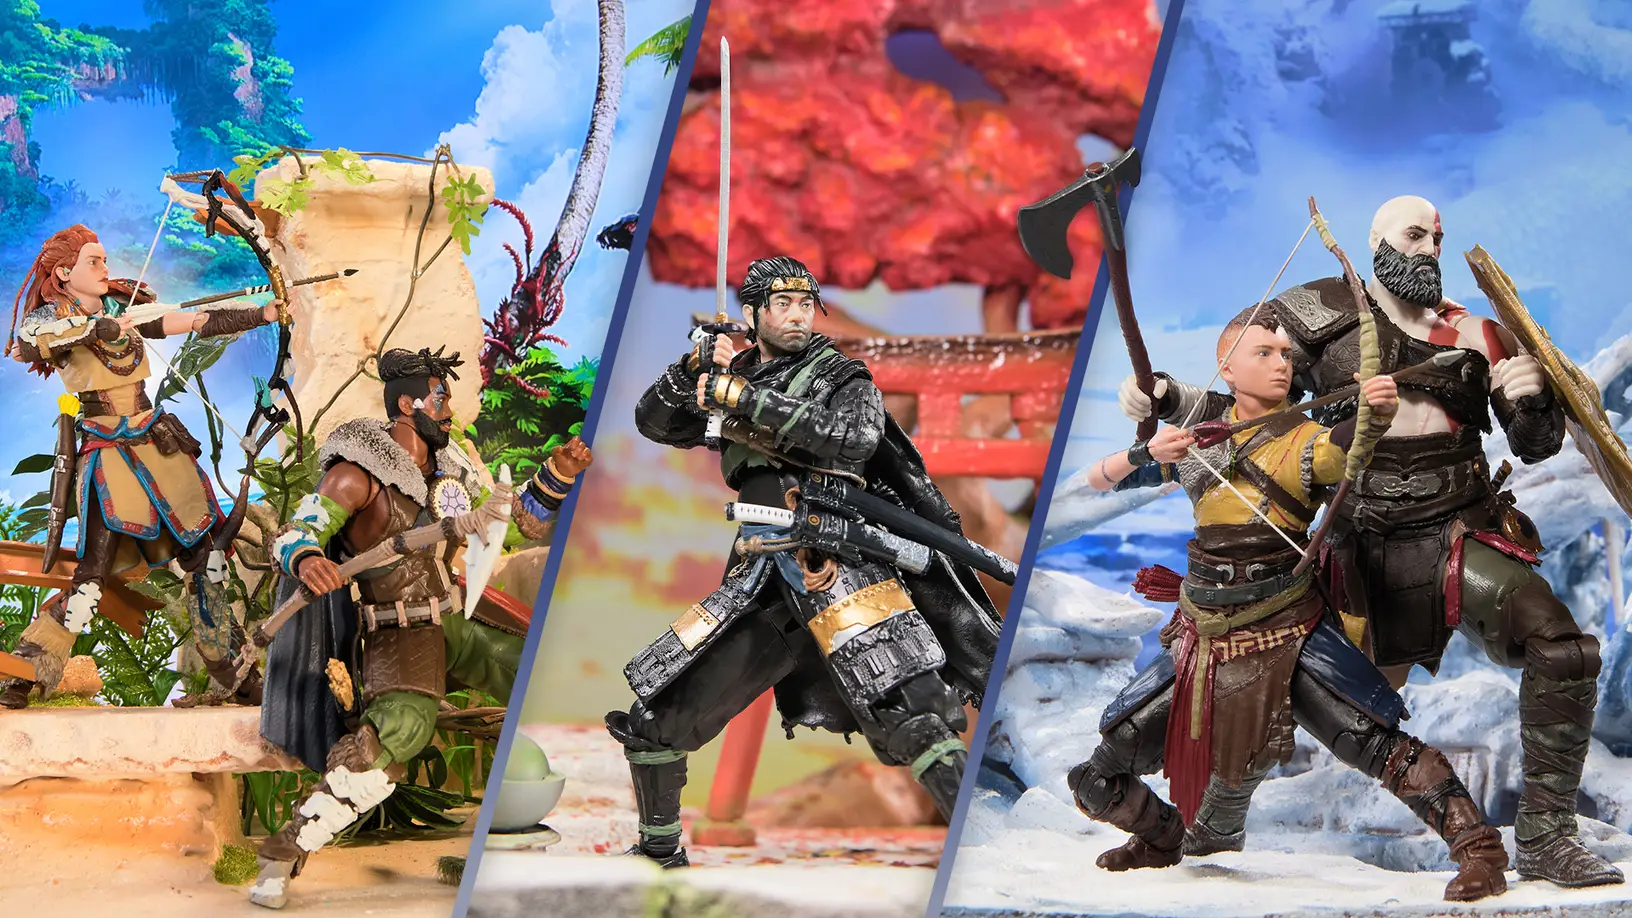 For collectors: Sony announces figures featuring iconic PlayStation game characters such as Kratos, Eloy, and Jin Sakai